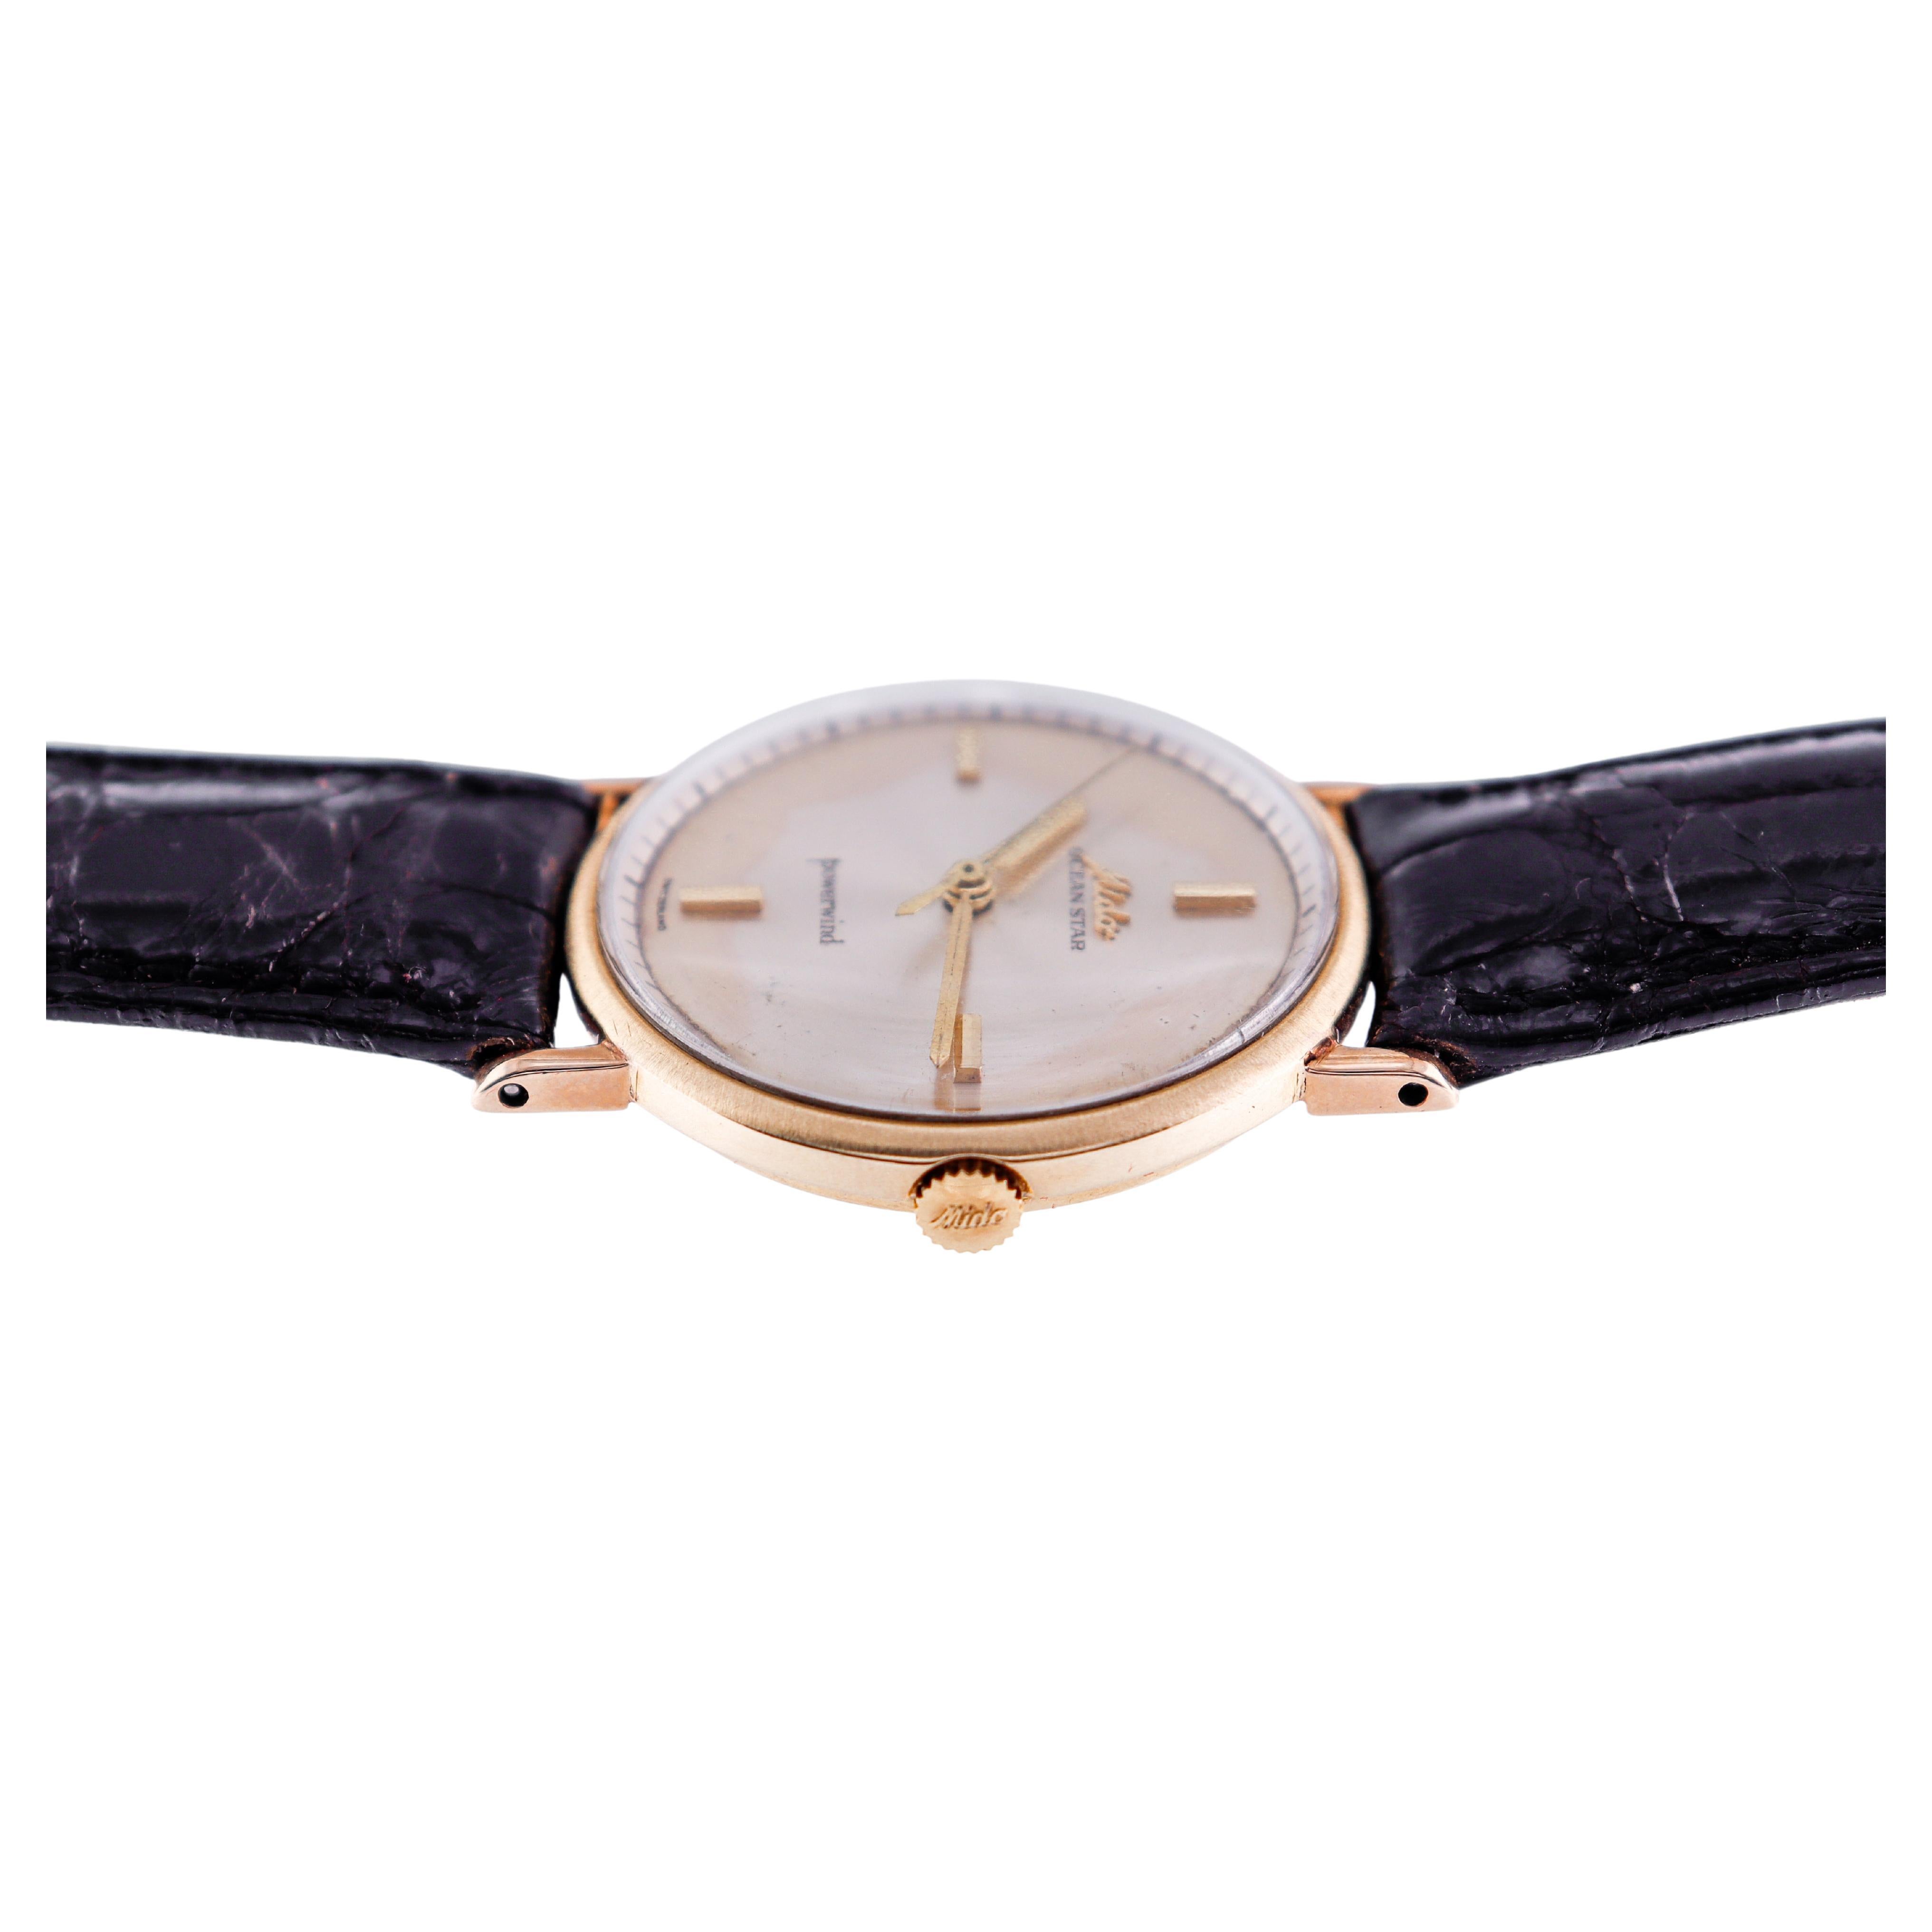 Mido 14Kt. Yellow Gold Ocean Star Art Deco Style Power Wind Watch, circa 1950s For Sale 1